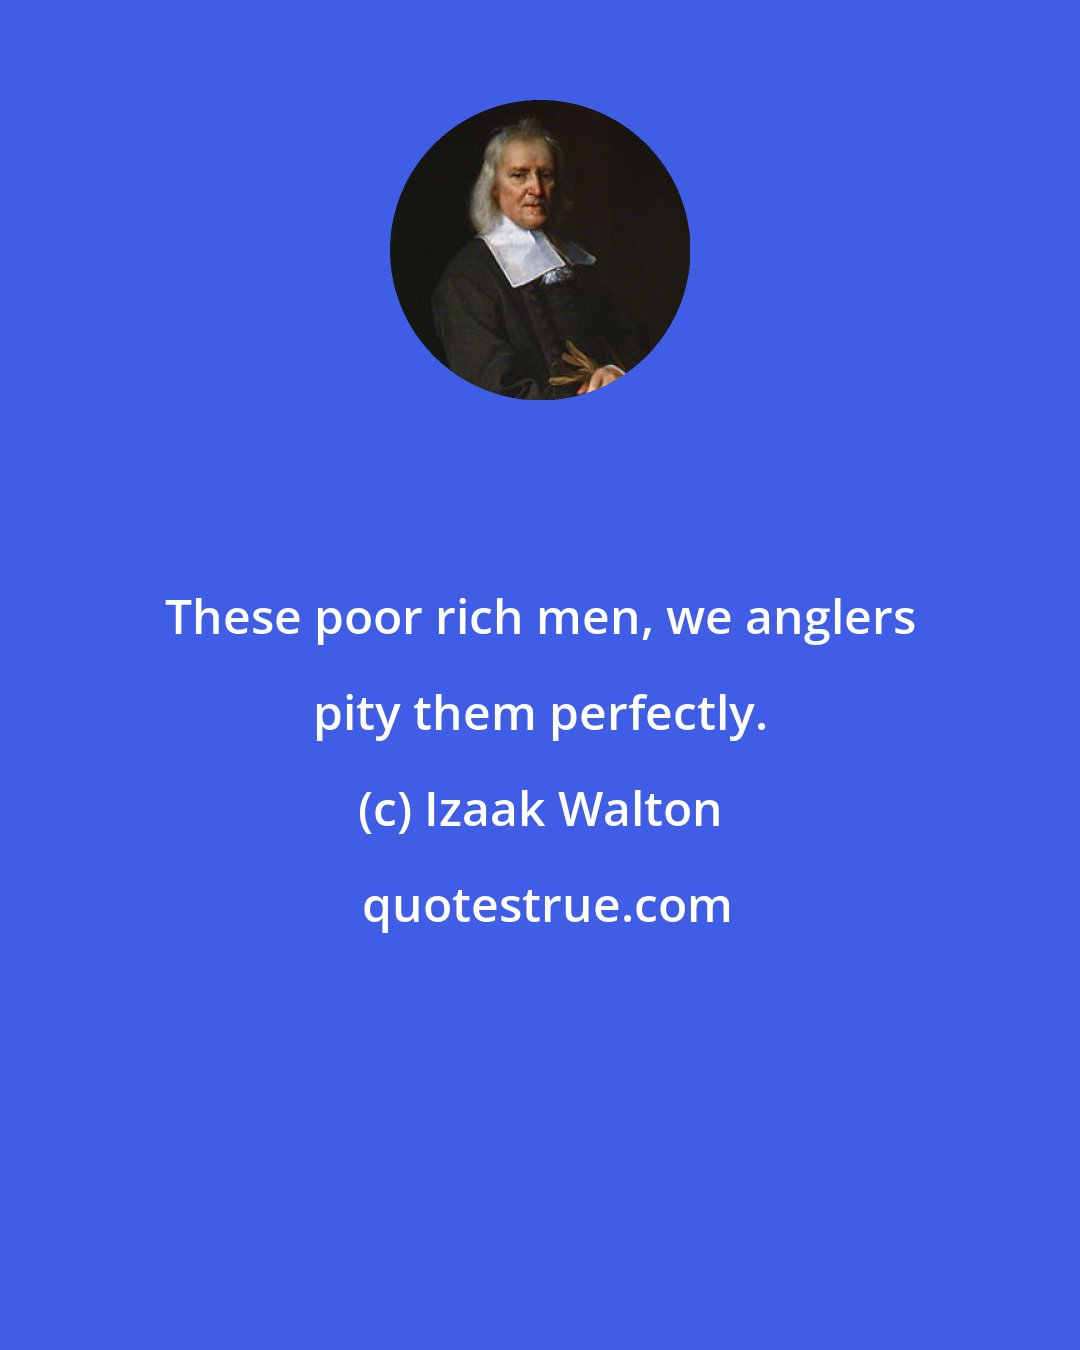 Izaak Walton: These poor rich men, we anglers pity them perfectly.